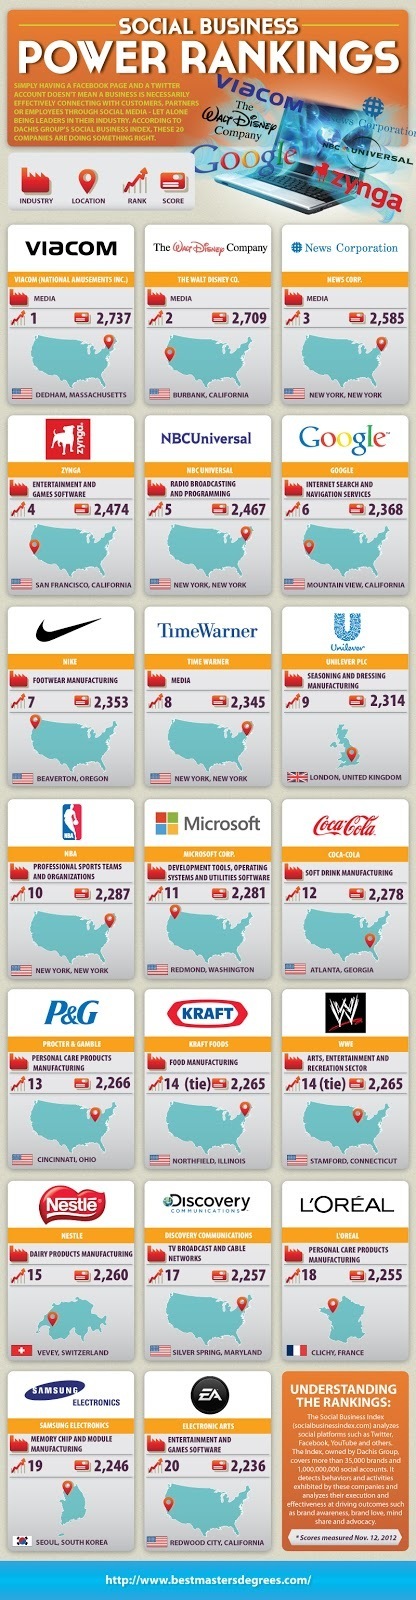 Biggest Social Brands in 2012 by Industry: #Infographic | Business Improvement and Social media | Scoop.it